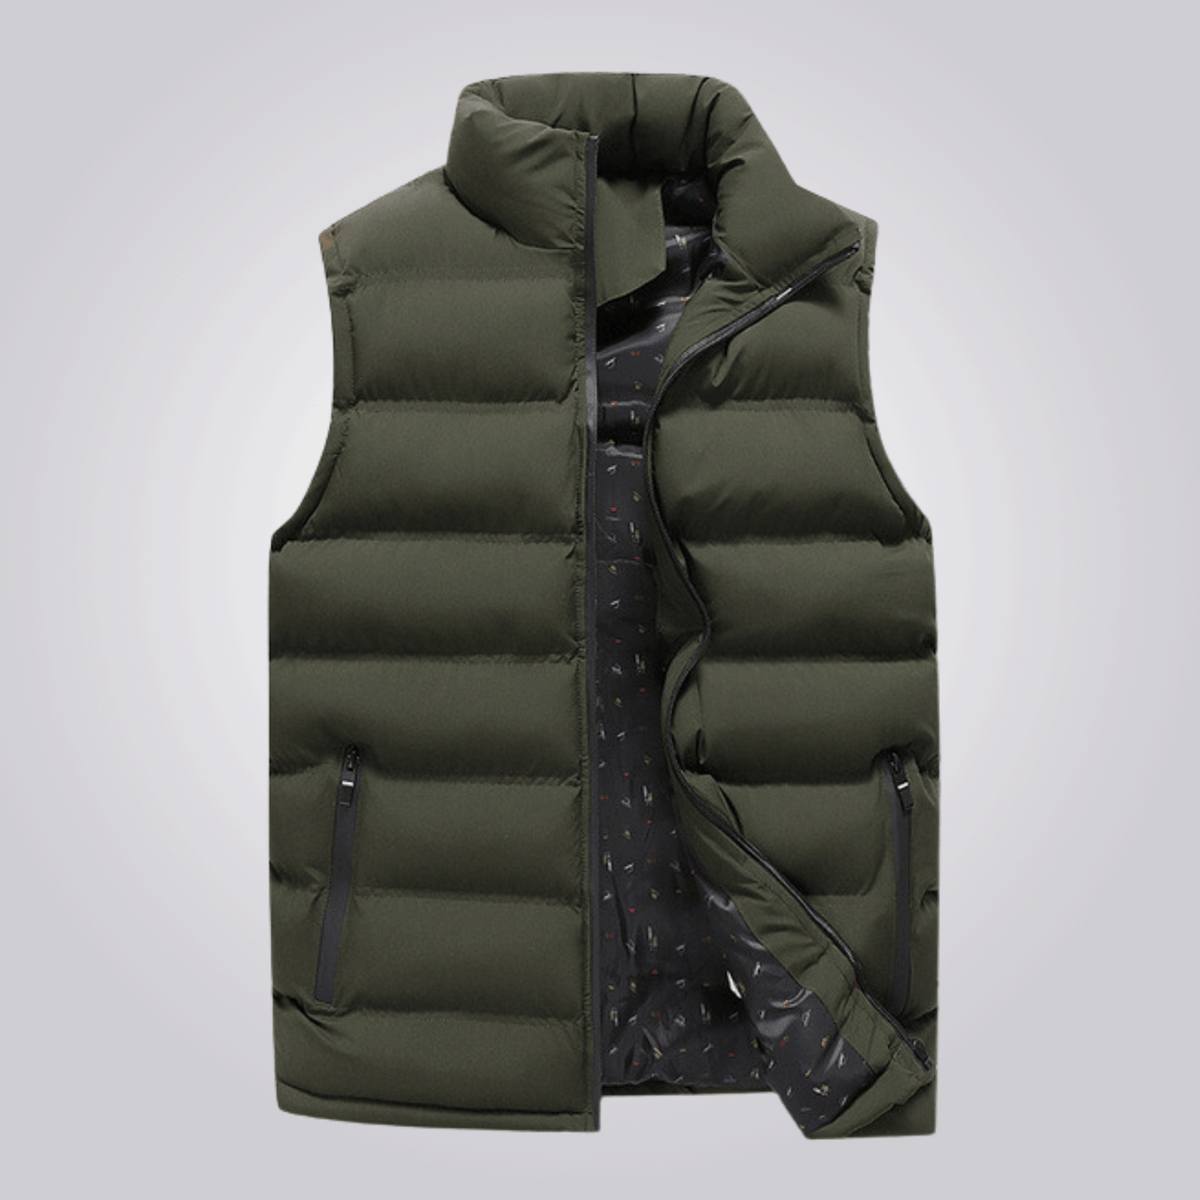 Colete Masculino Puffer Lord Montevie